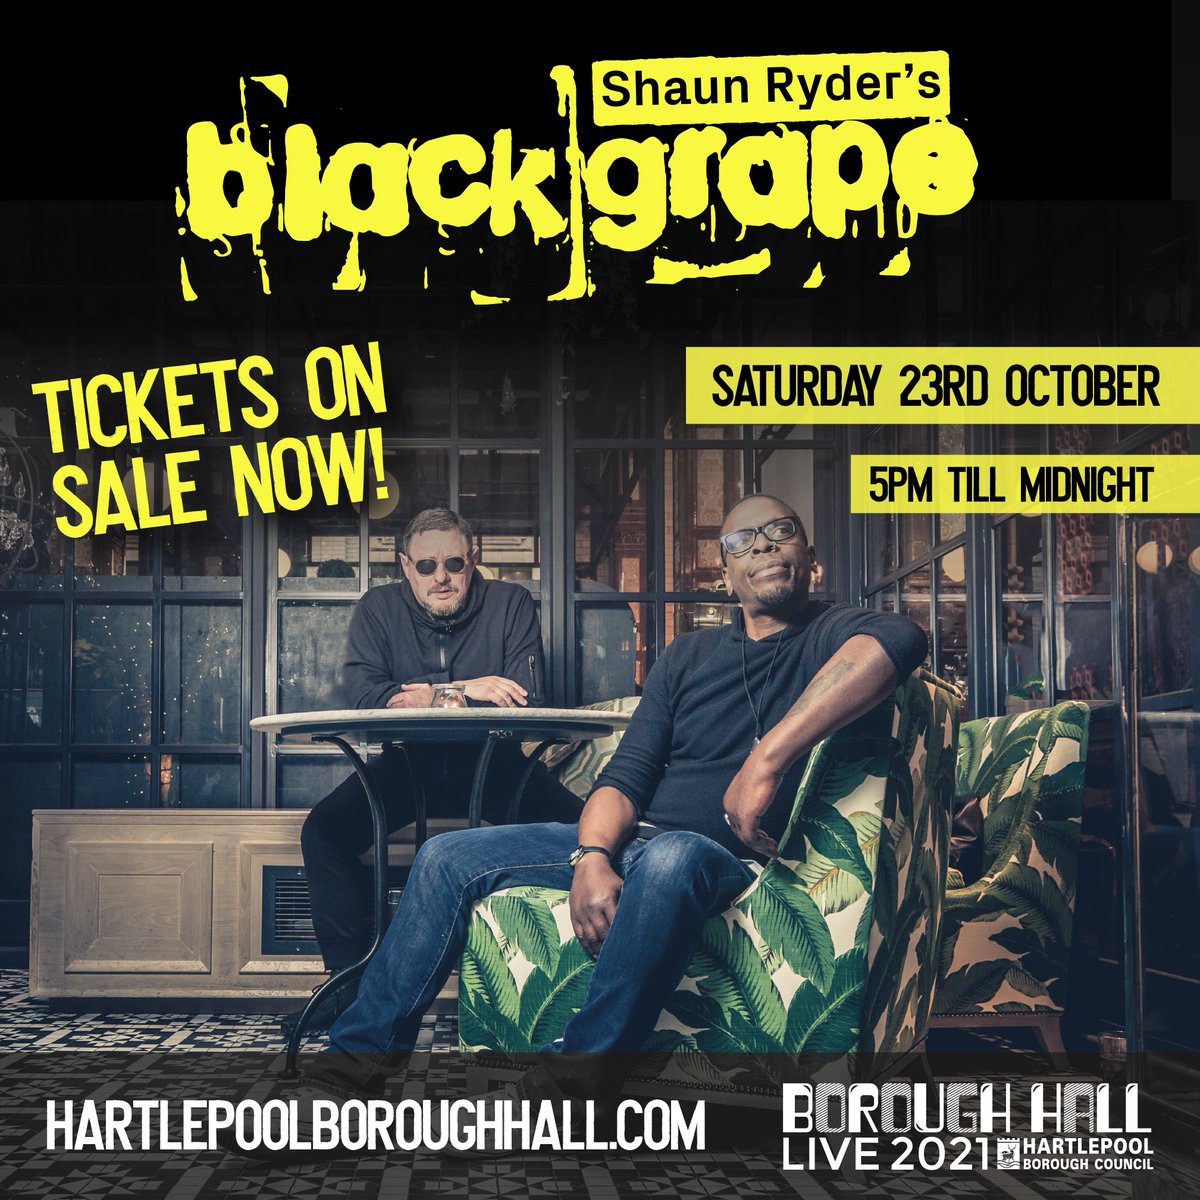 Black Grape announced for Borough Hall Live 2021!
Live music is baaack 🙌  

Black Grape will take their well-earned spot as headline act at Borough Hall Live this October 🎸

Tickets on sale now:  culturehartlepool.com/.../boroughhal…

#BlackGrape #BoroughHallLive2021 #Hartlepool #Livemusic